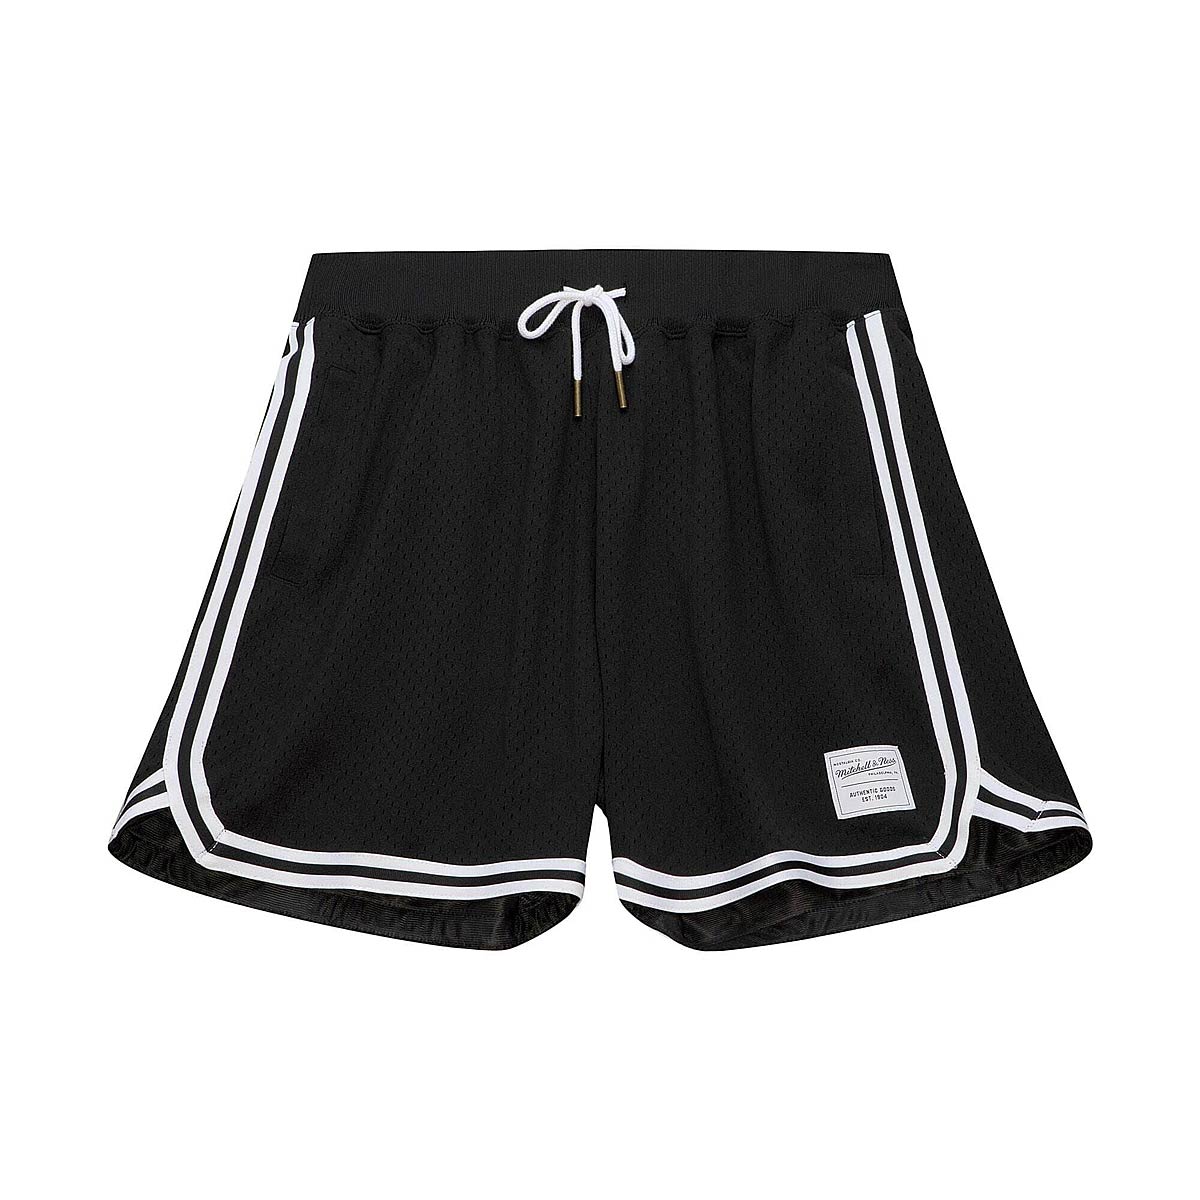 Image of Mitchell And Ness M&n Branded Game Day 2.0 Shorts, Black / White